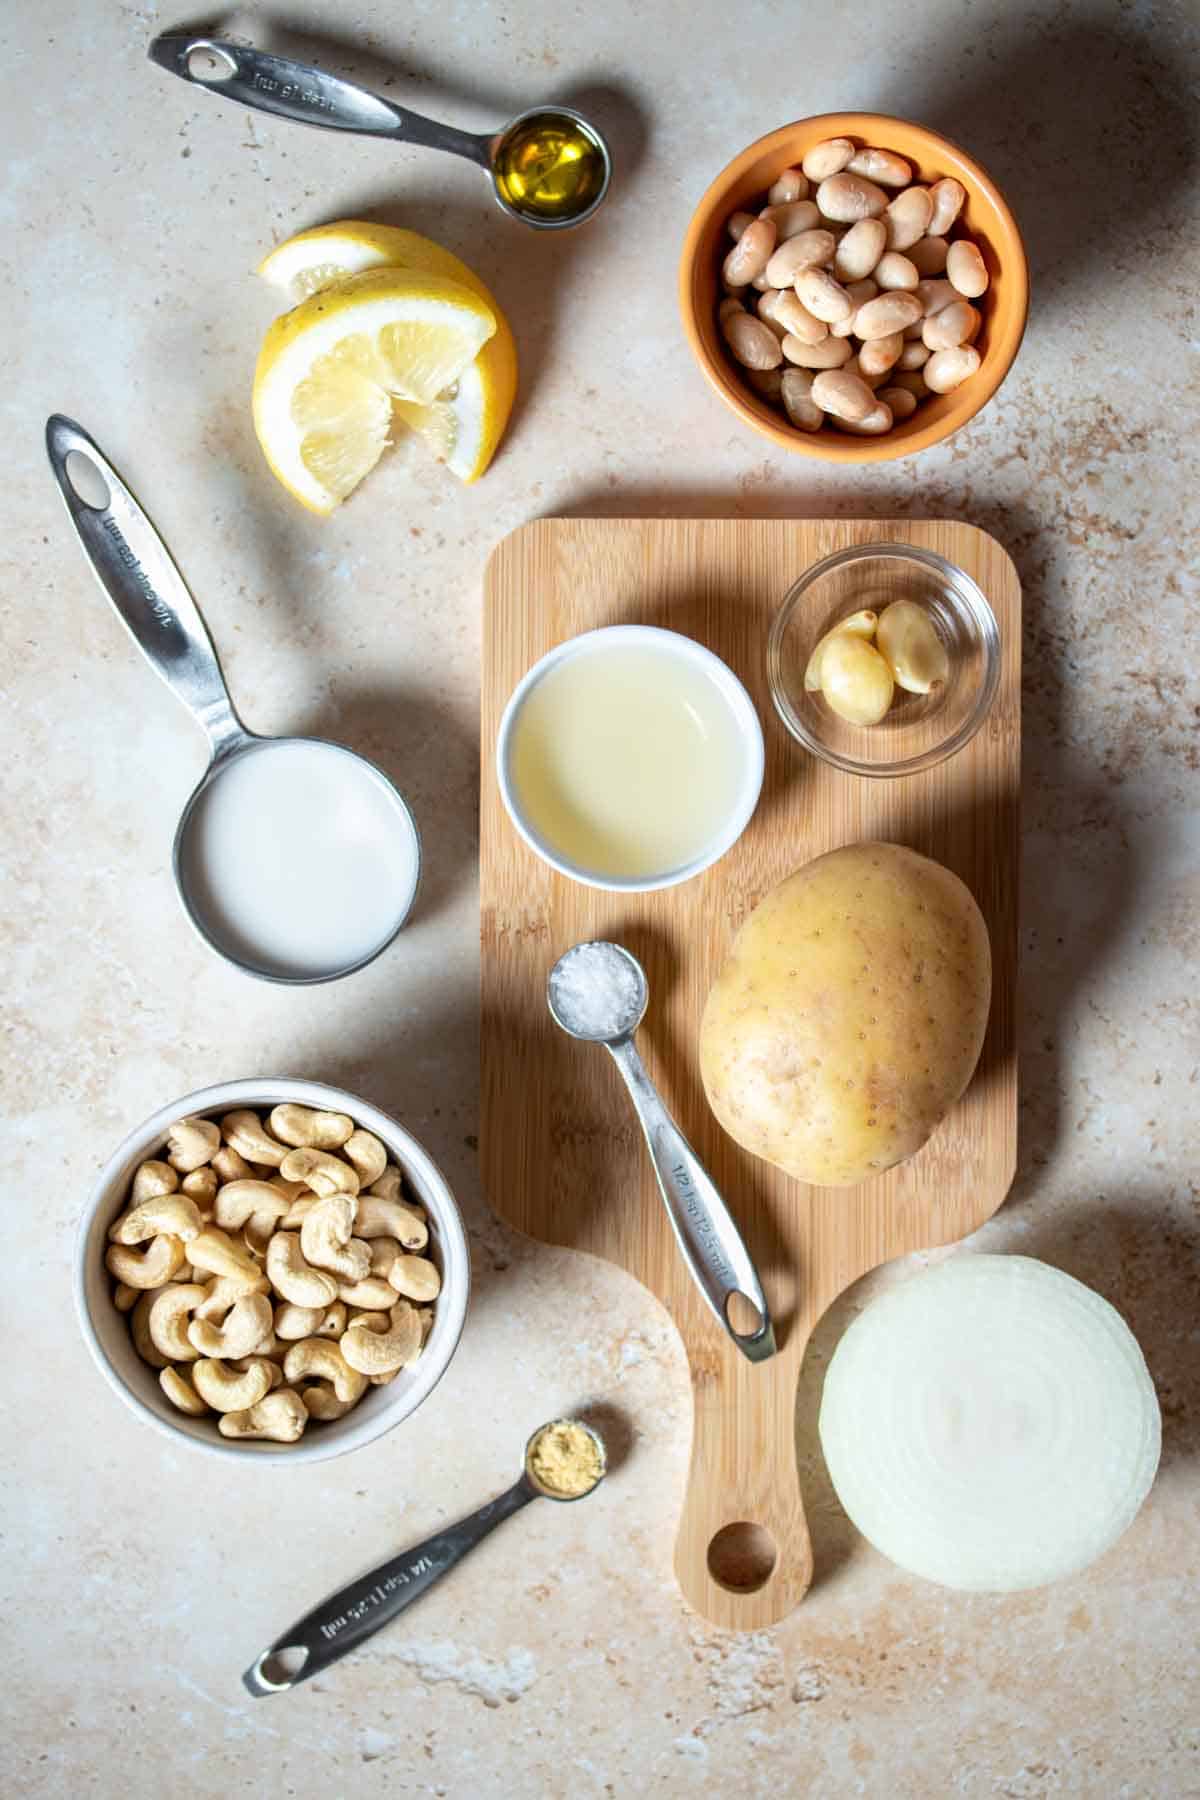 Top view of a tan surface with bowls of nuts, liquids, onoin, potato, white beans, lemon and seasonings.